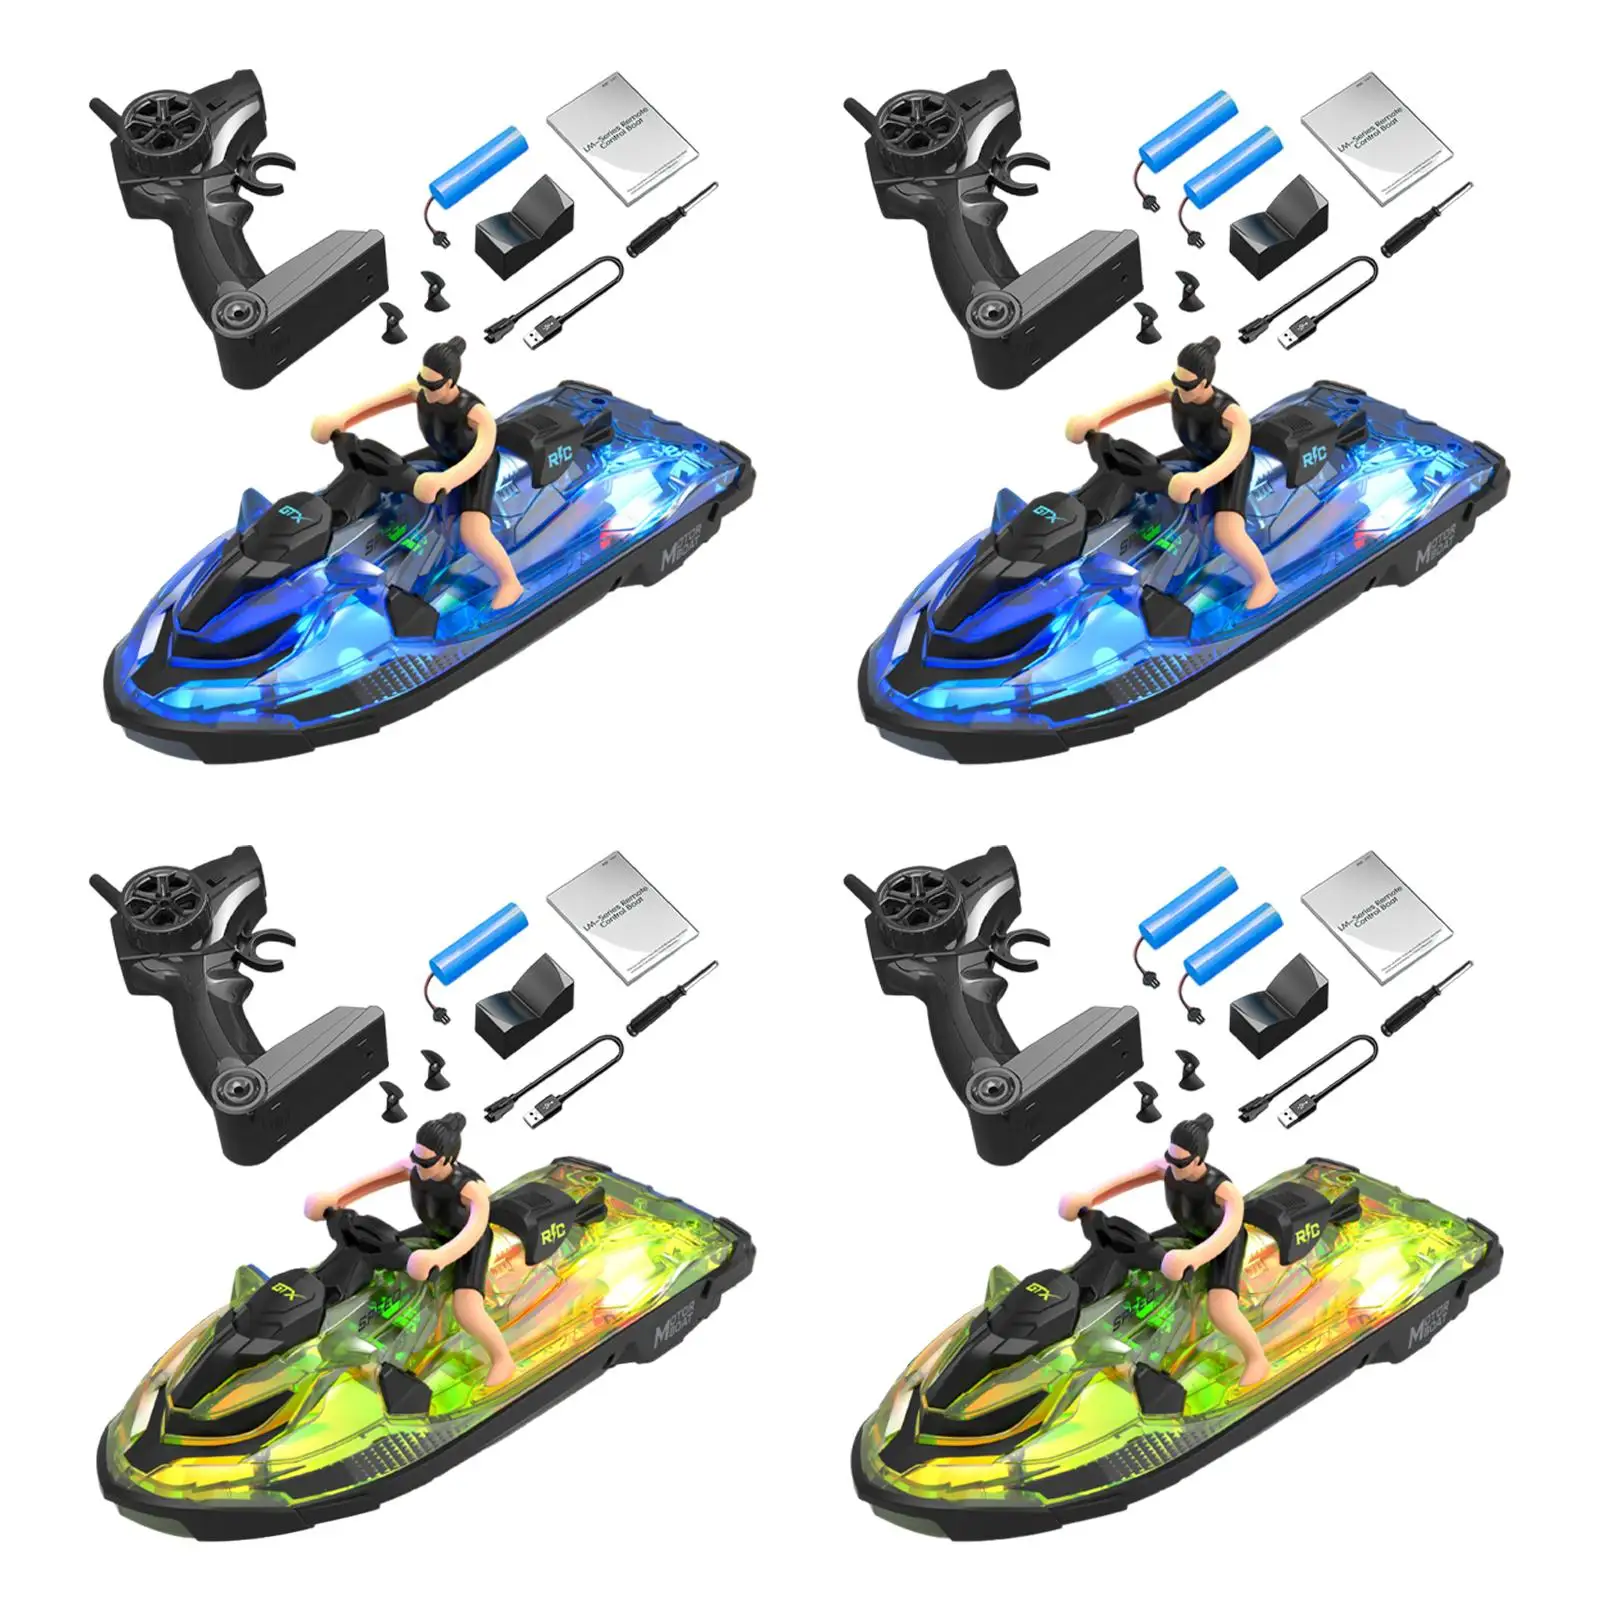 RC Boat Swimming Pool Flexible Pools and Lakes Speedboat Motorboat Remote Control Boat for Kids Girls Boys Adults Birthday Gifts